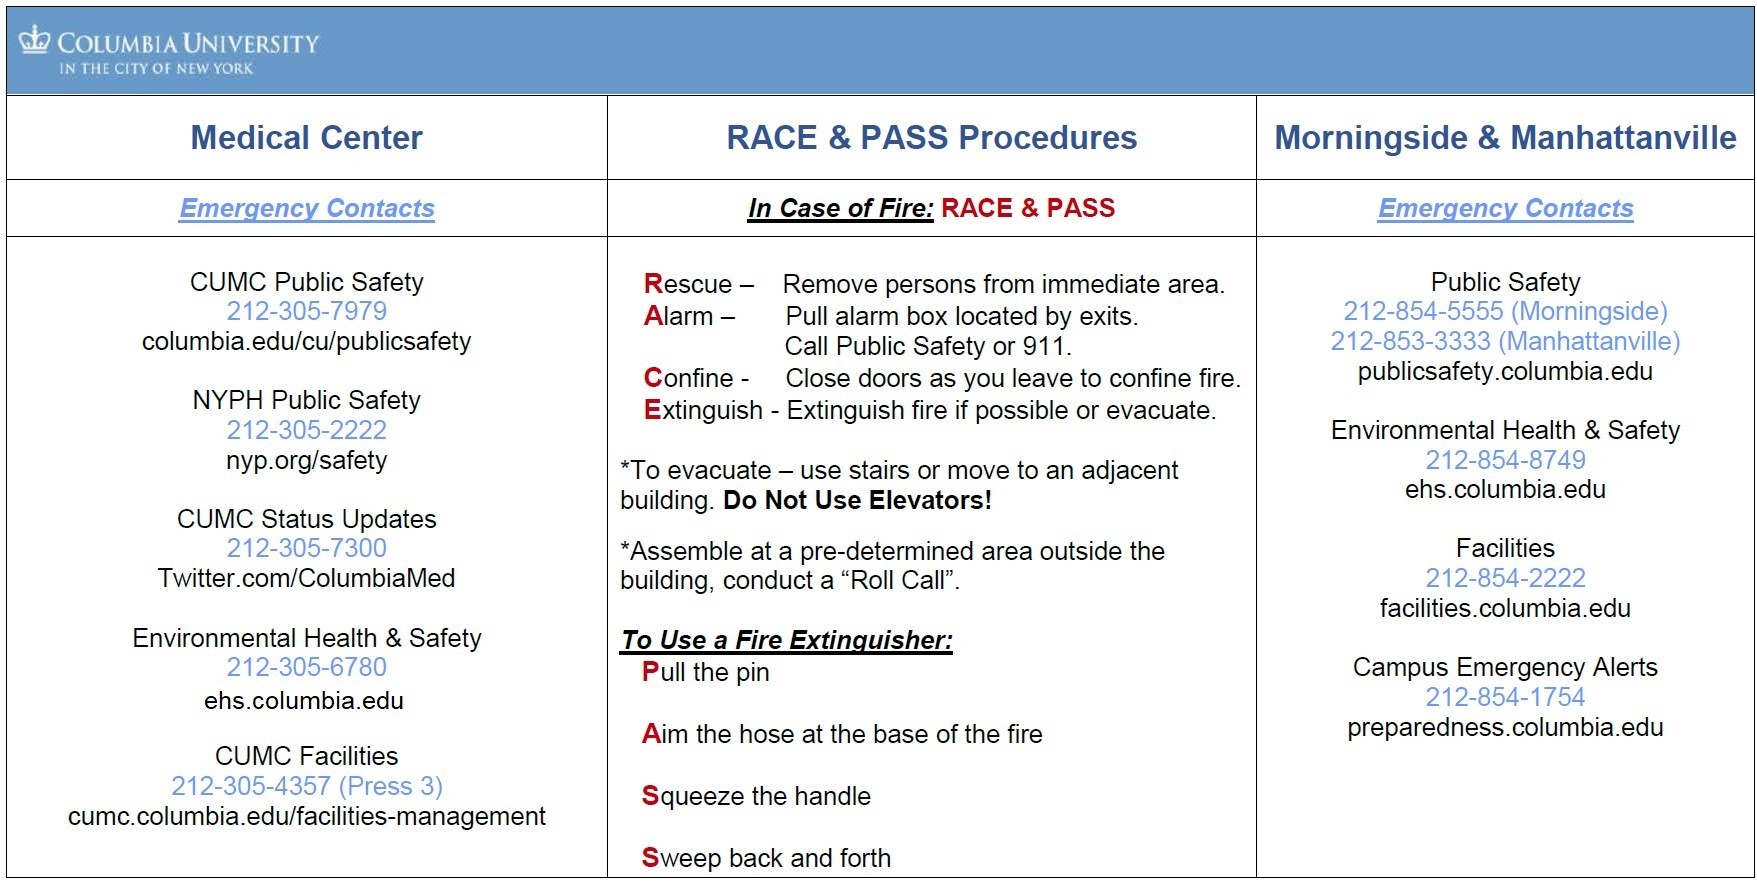 Race & Pass procedures and emergency contacts.